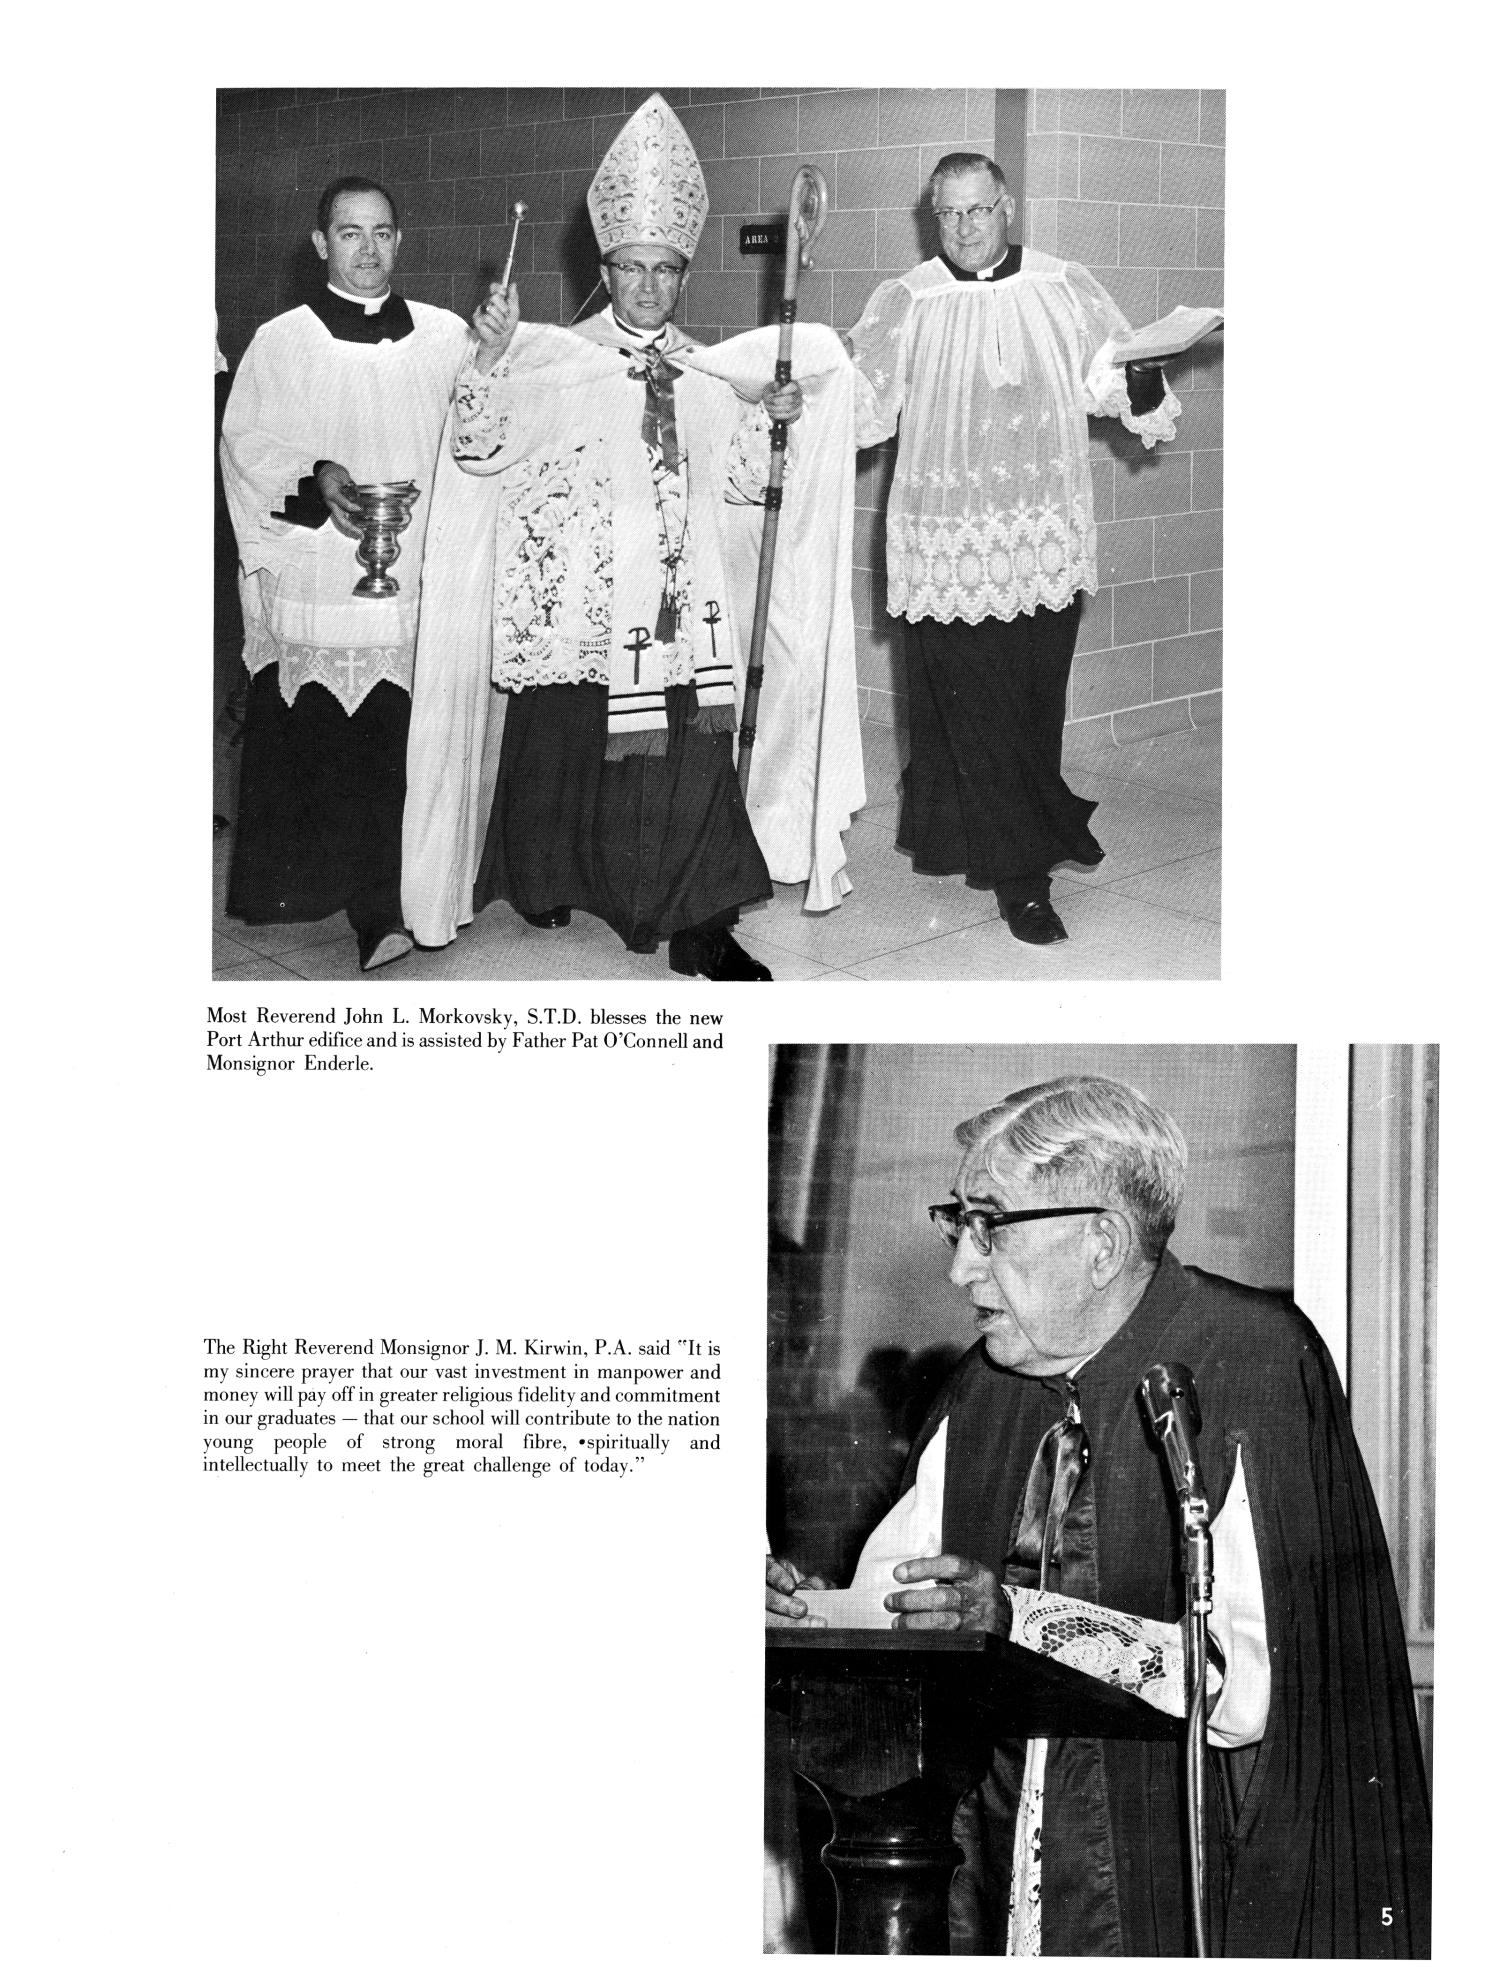 The Christopher, Yearbook of Bishop Byrne High School, 1966
                                                
                                                    5
                                                